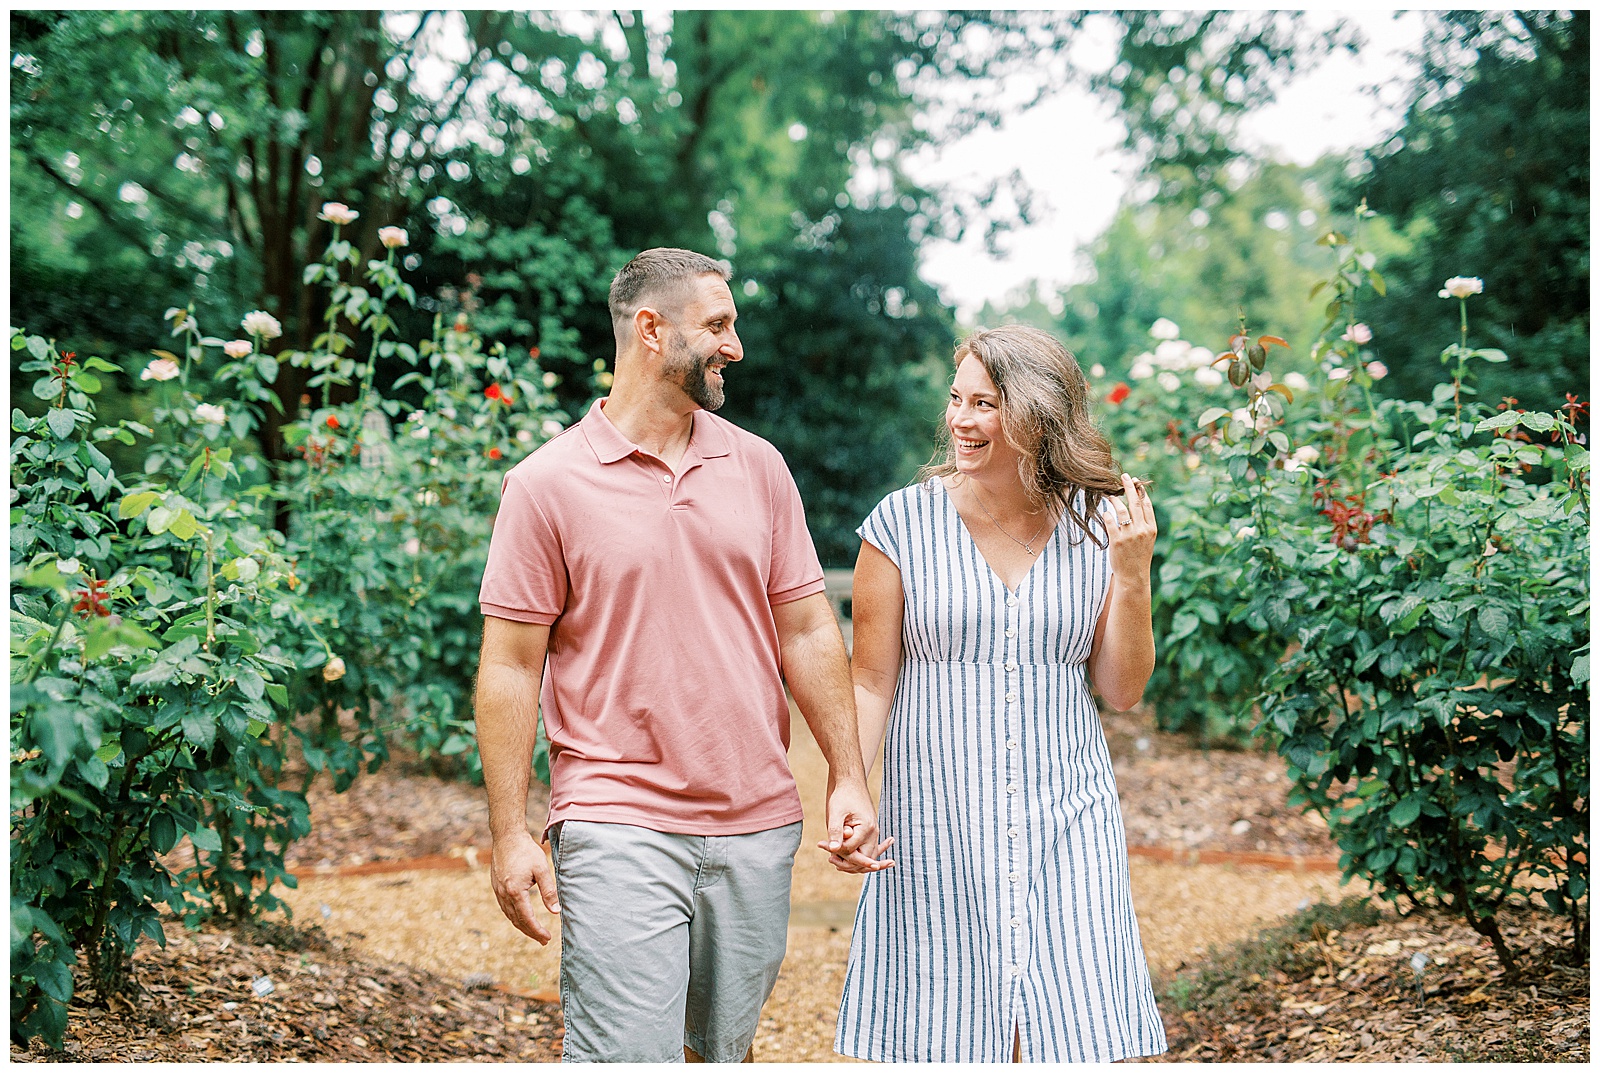 Couple Engagement Session in Gardens at Duke Mansion Garden with Blue Pinstripe Summer Dress